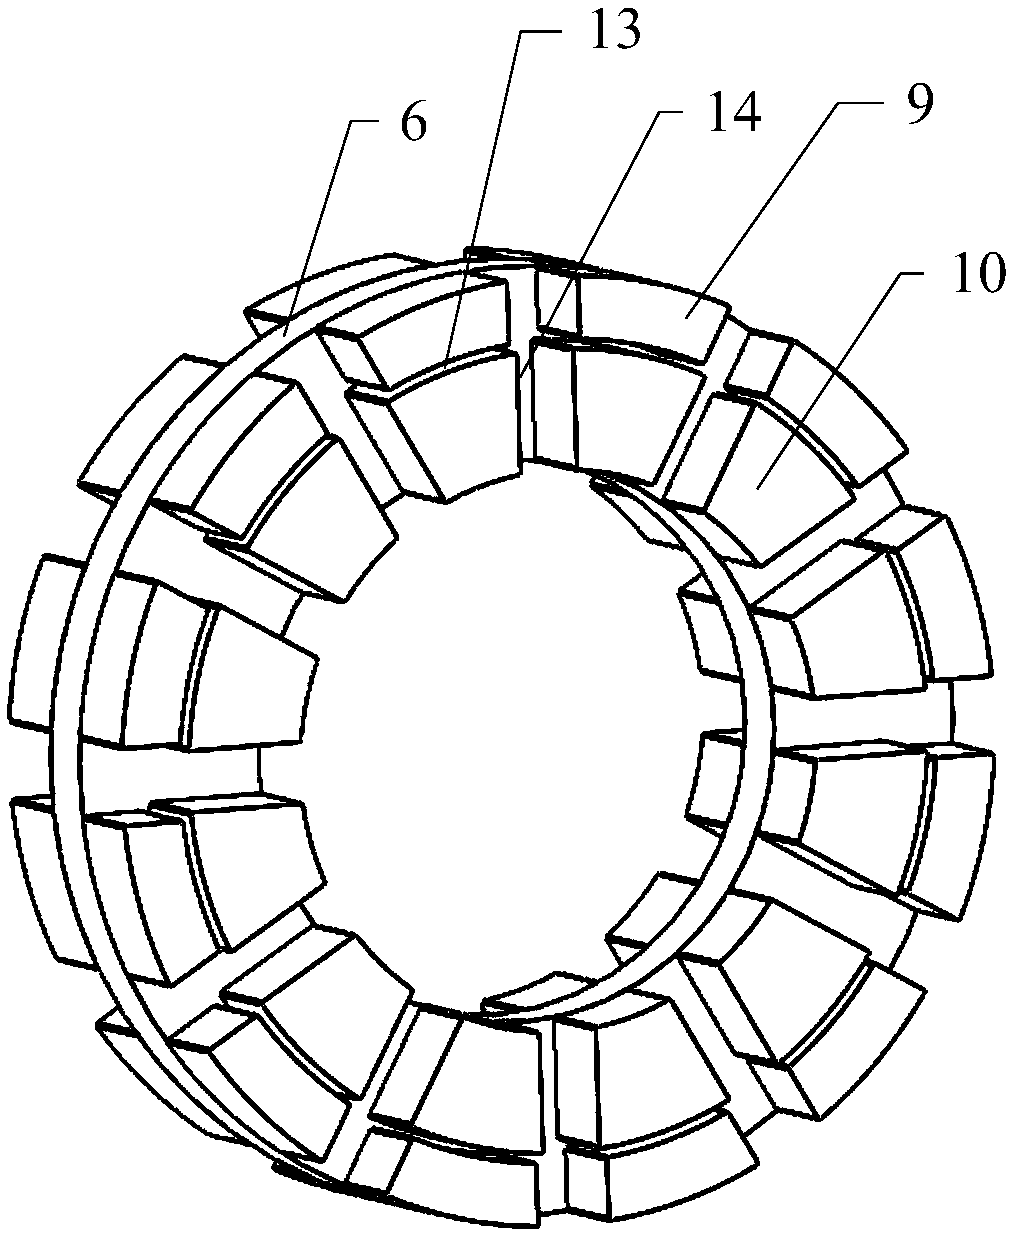 Compound amorphous alloy axial flux motor